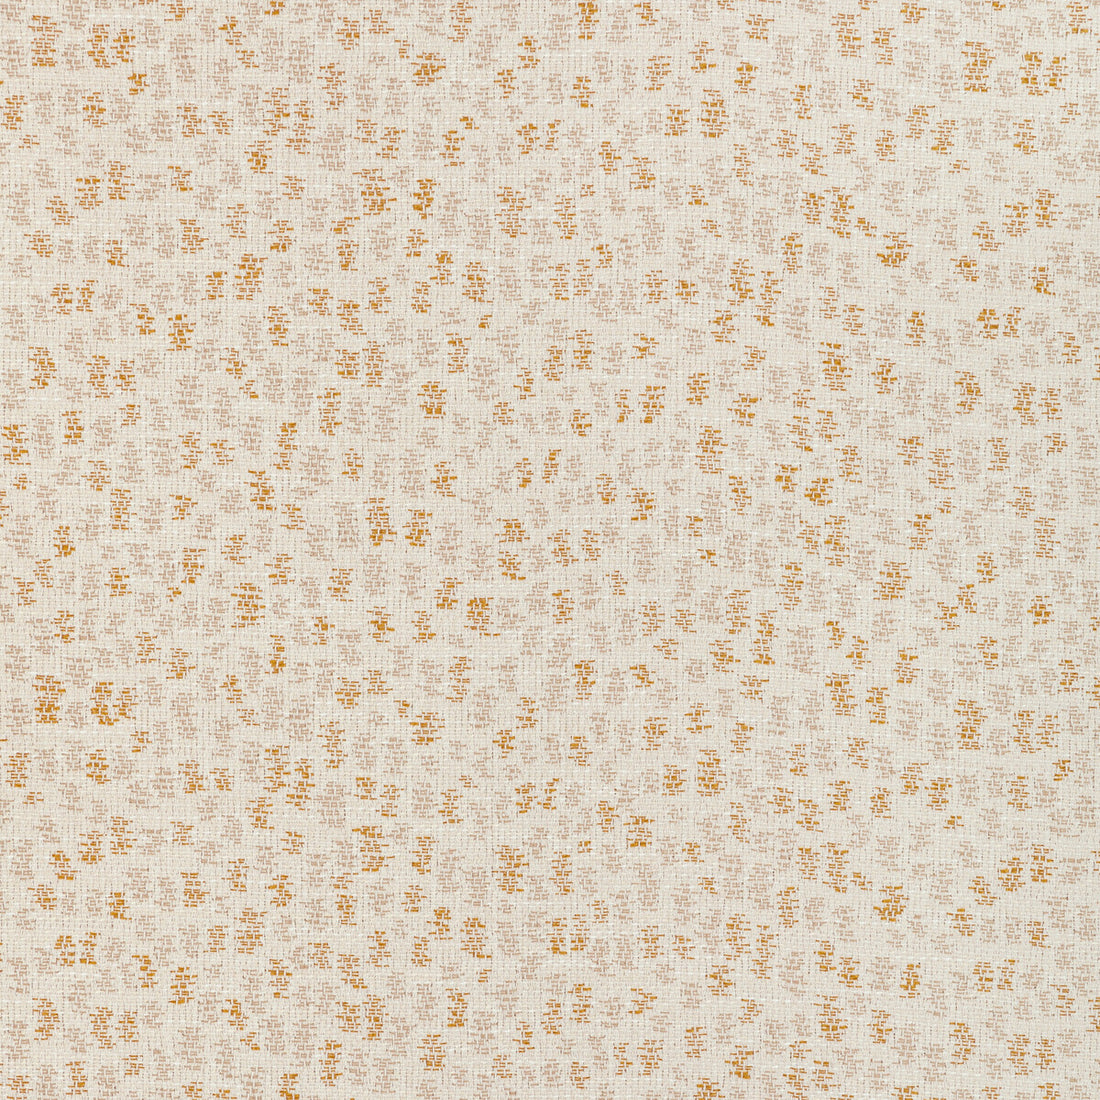 Combe fabric in sesame color - pattern GWF-3787.1614.0 - by Lee Jofa Modern in the Kelly Wearstler Oculum Indoor/Outdoor collection